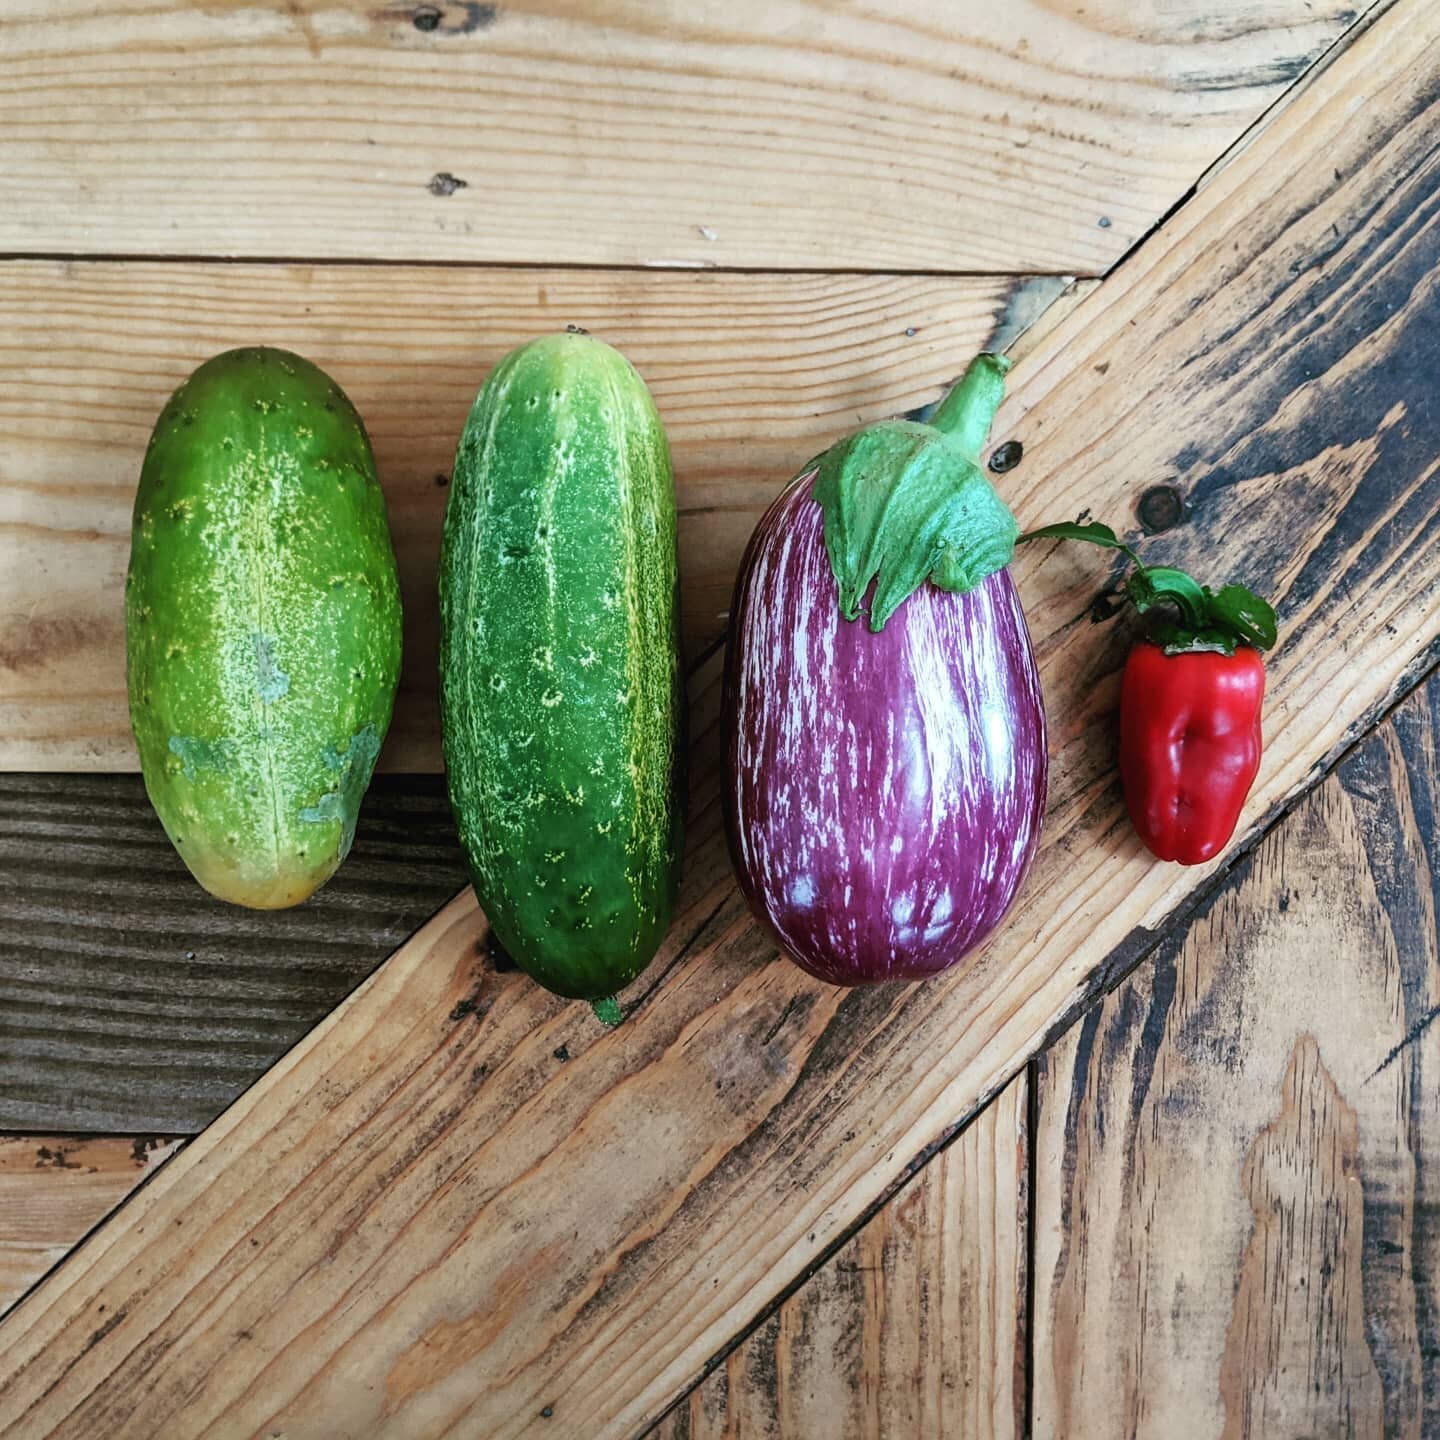 Today's harvest from the garden, I caught these cucumbers a little late as I wasn't expecting them for a week or so yet. I'll have to try them before I cut them up to make pickles! I am very excited for this eggplant and that little sweet pepper will